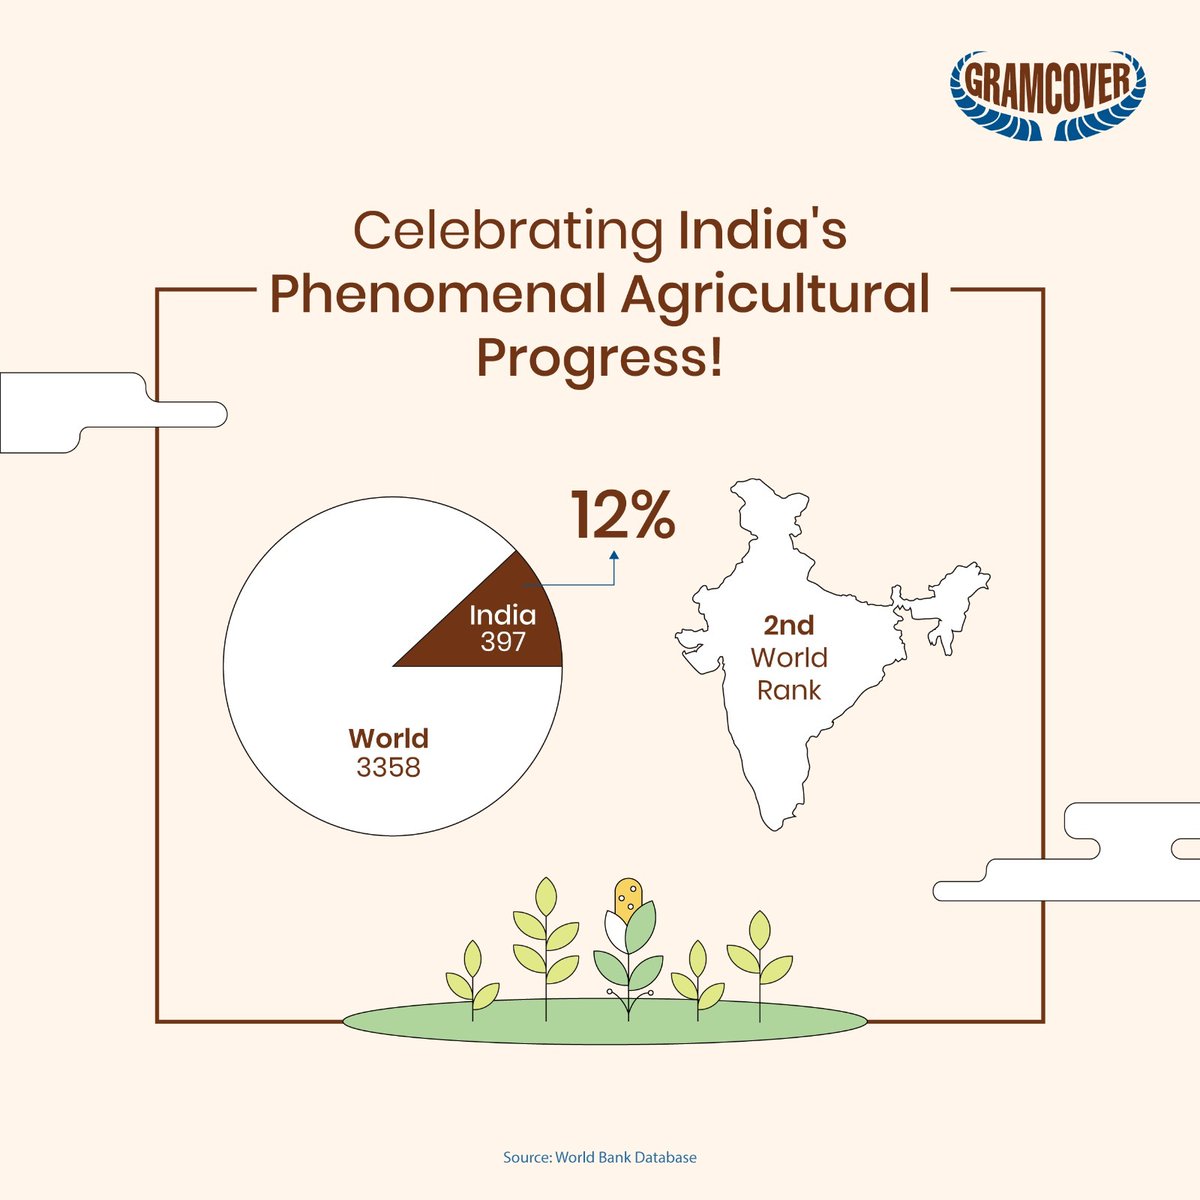 India is the world's second-largest agricultural producer, with self-sufficiency in food since the 1960s. Gramcover proudly insures India's agricultural sector, supporting its global success.
#AgriculturalPowerhouse #FoodSelfSufficiency #GramcoverInsuresAgri